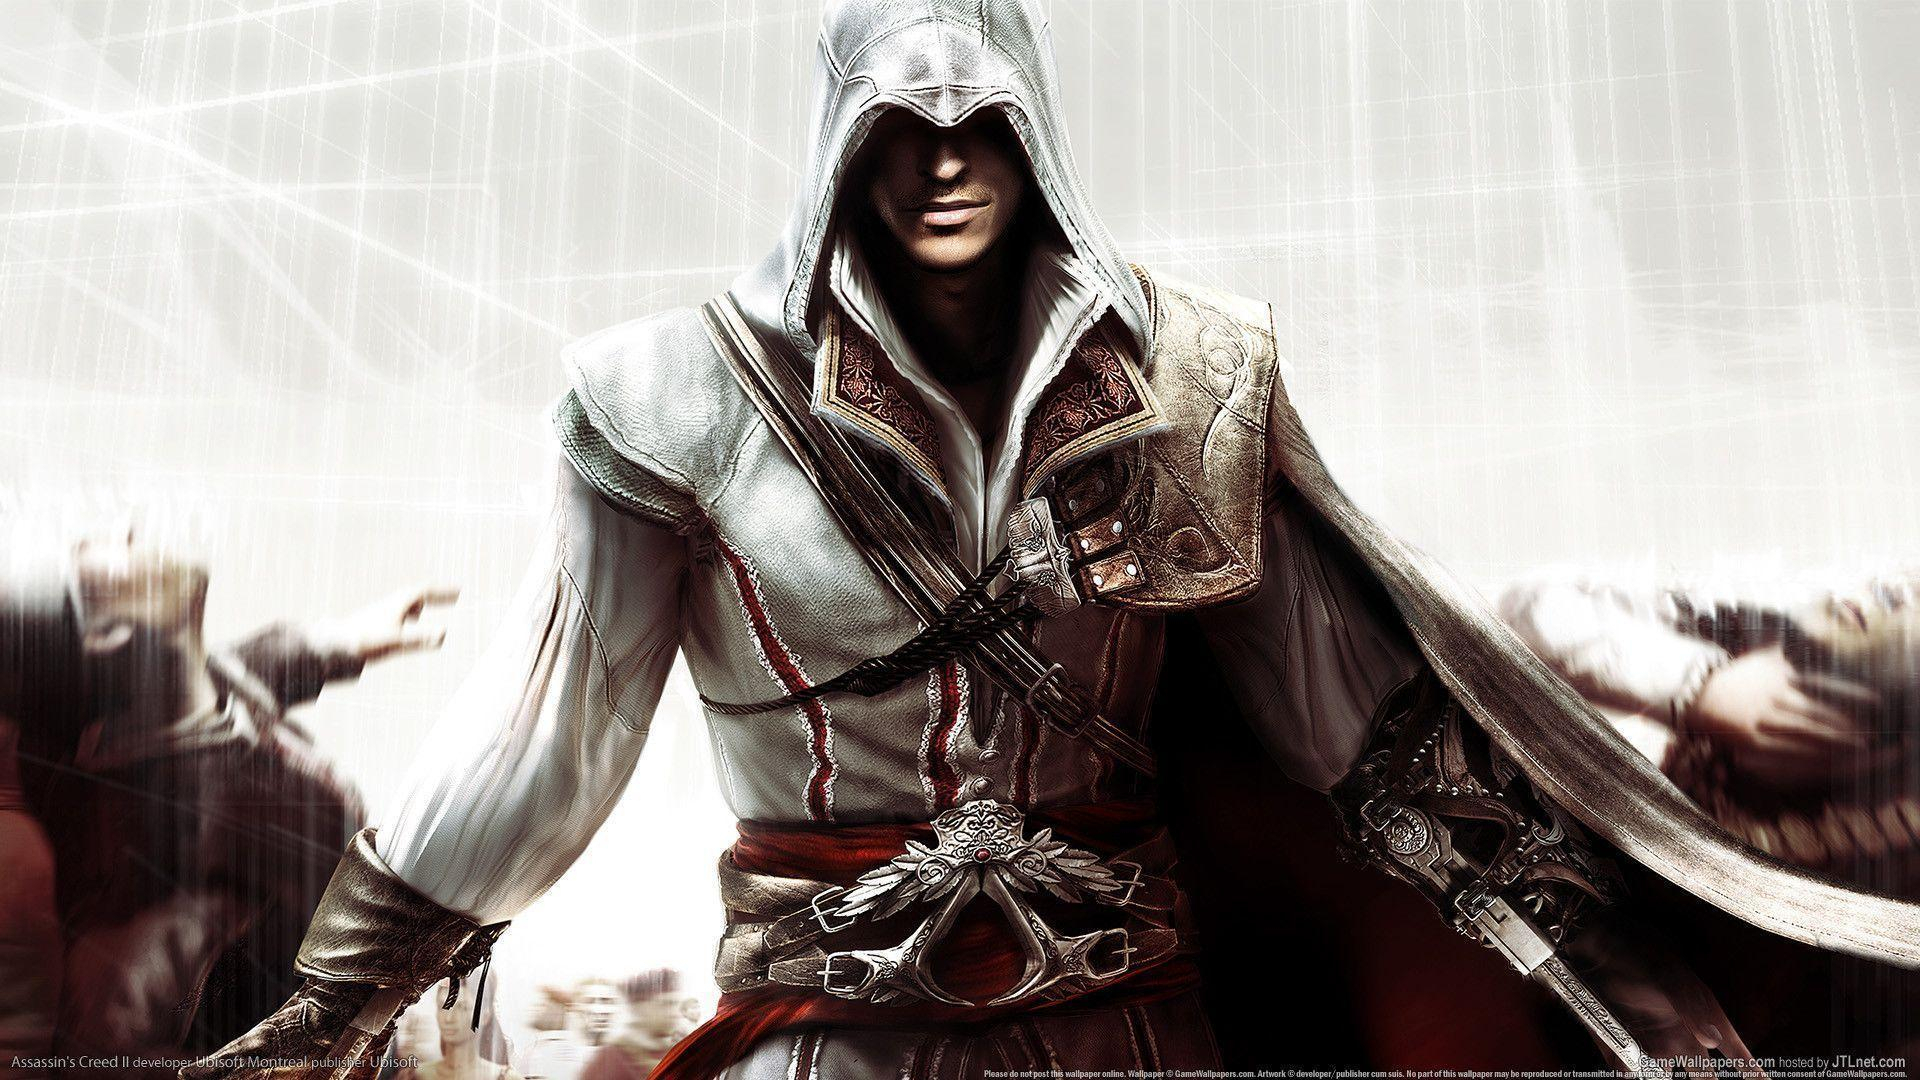 10 Most Popular Assassin's Creed Wallpaper Hd FULL HD 1080p For PC Background